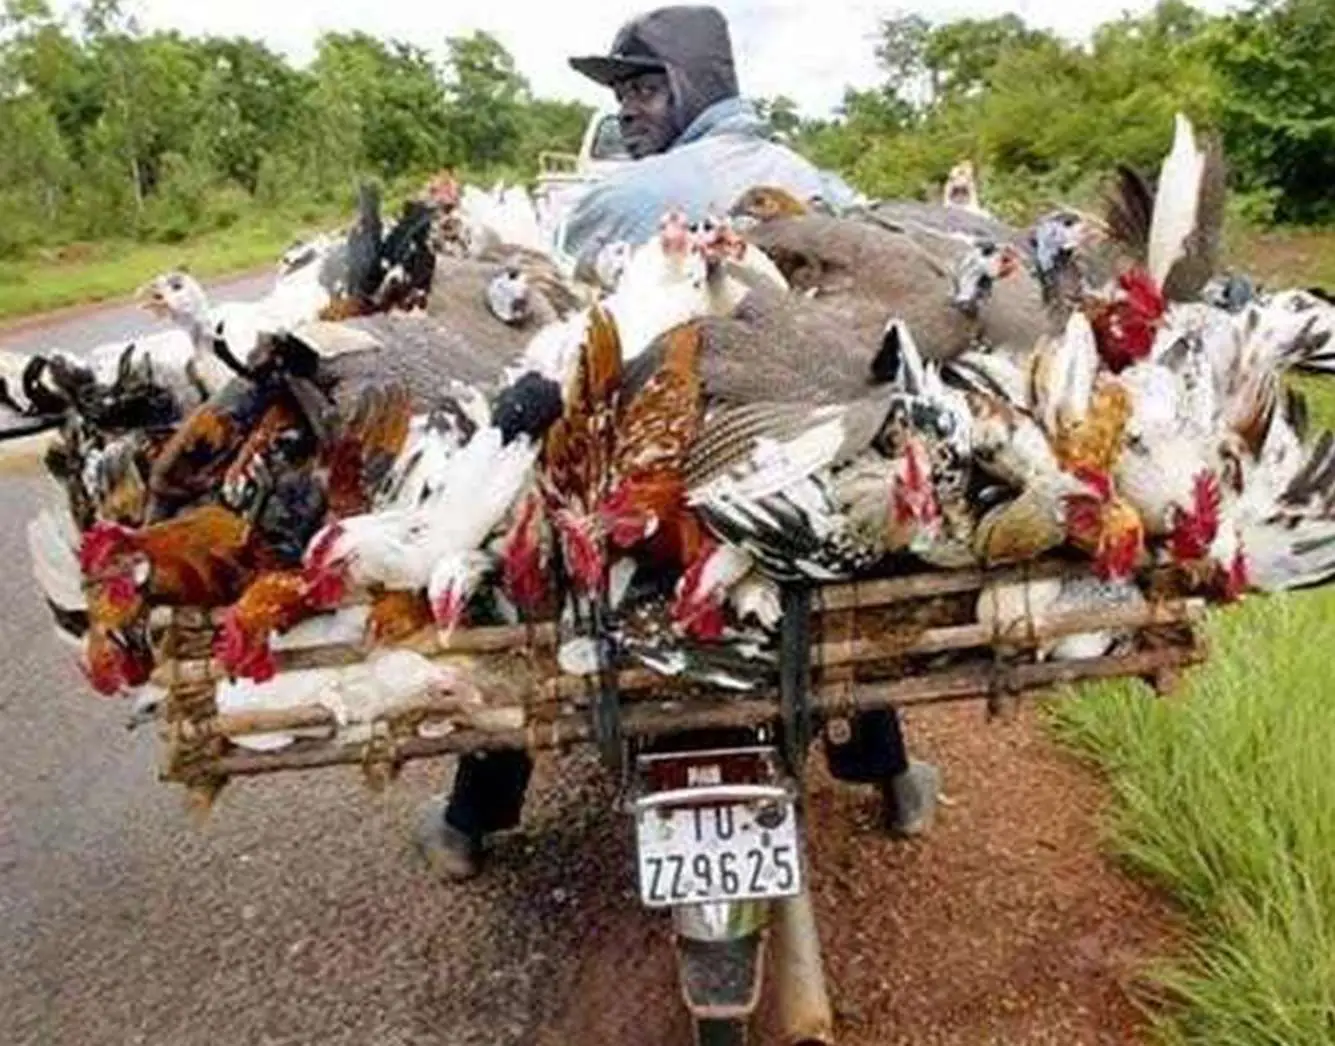 Transporting Poultry By Motorbike